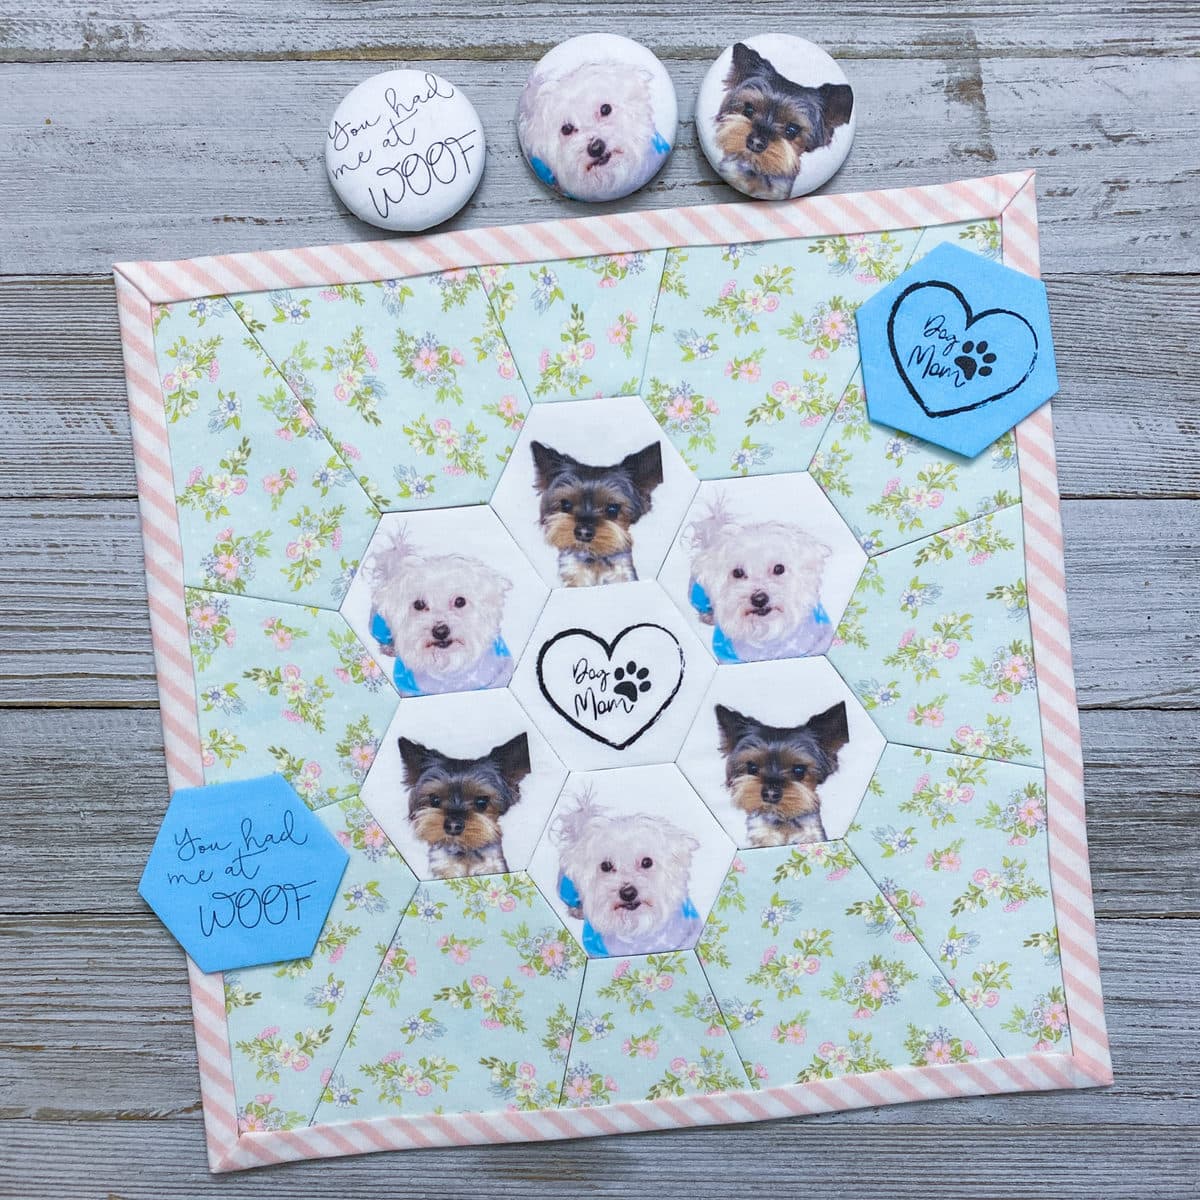 Elise's mini quilt featuring photos of her dogs